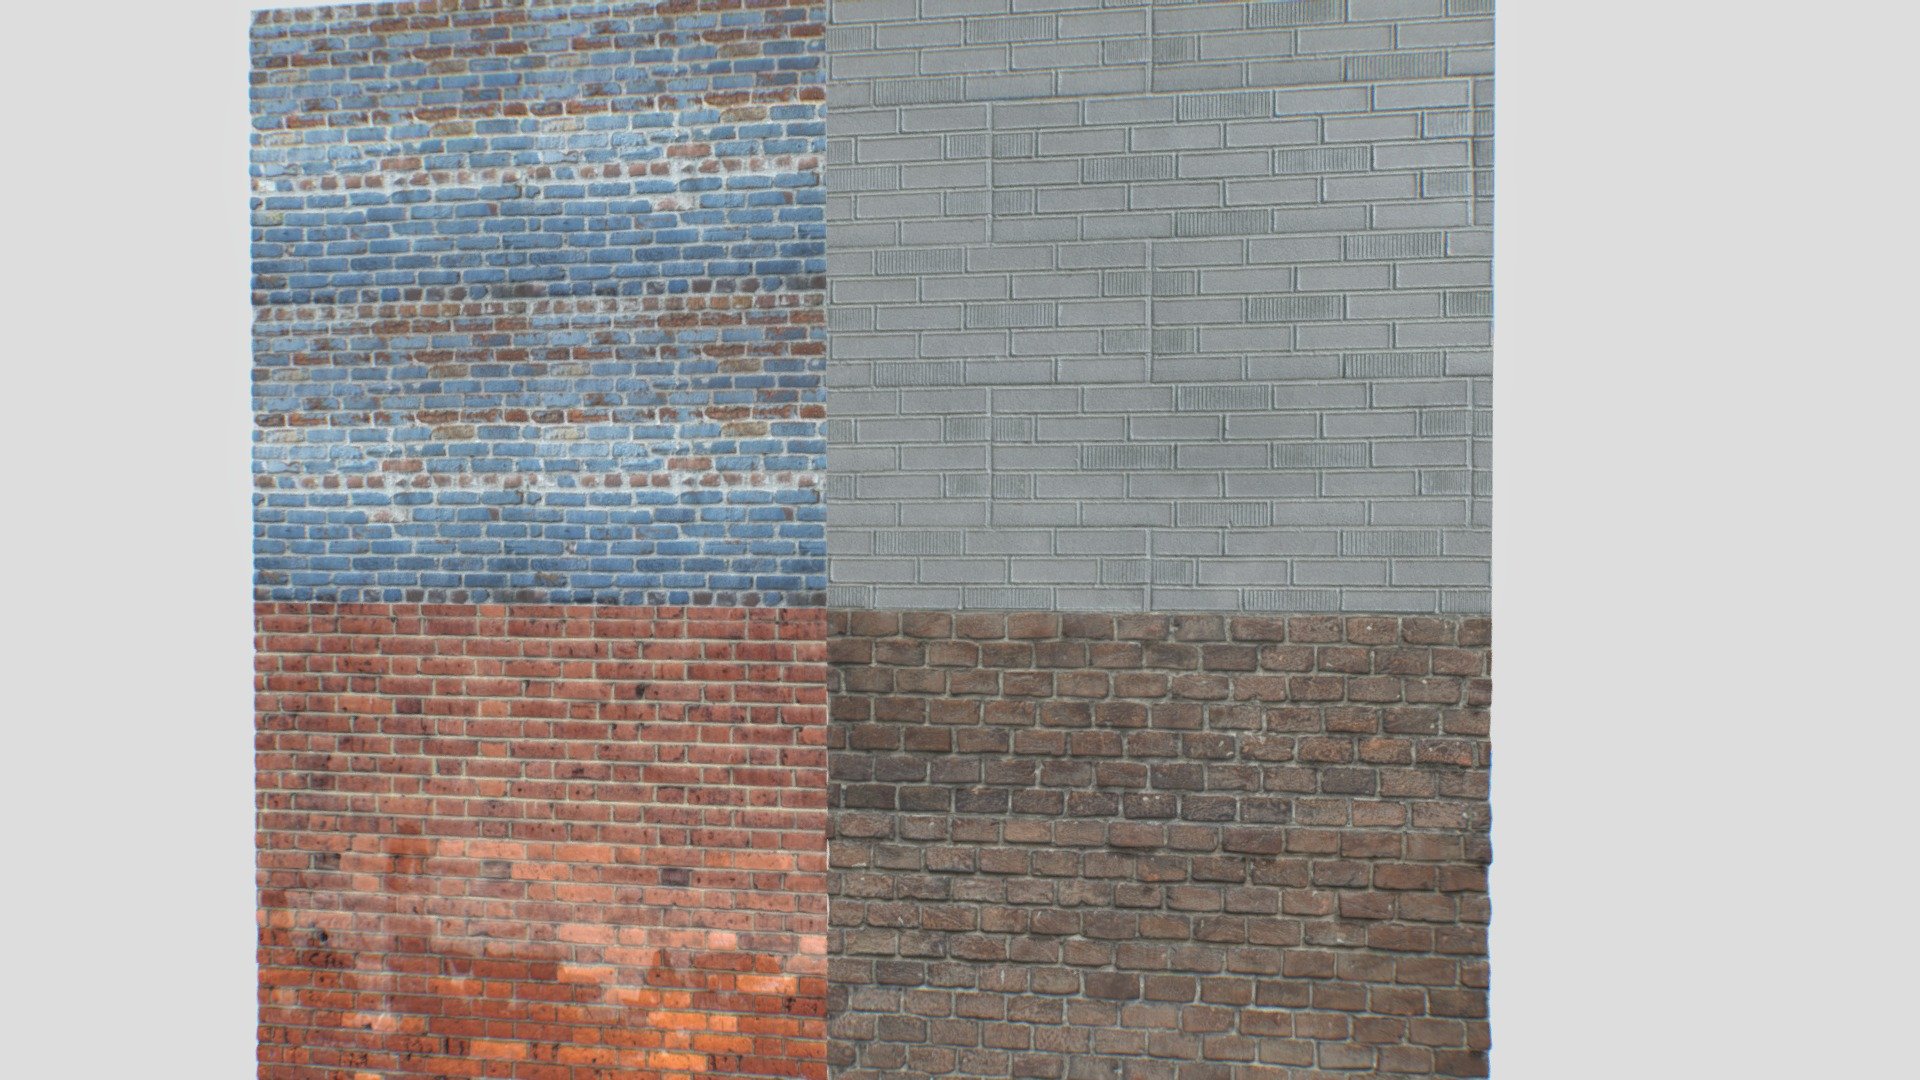 4 different seamless PBR textures.

4096x4096px size with Albedo, Normal, Displacement, Roughness, Metalness, AO. PNG and TGA seamless textures. 

Textures consist in a mix of old brick textures.

All ready for tessellation shaders. 
Suitable for walls, basements, buildings, fences, etc&hellip; - Brick wall textures pack 2 - Buy Royalty Free 3D model by 32cm 3d model